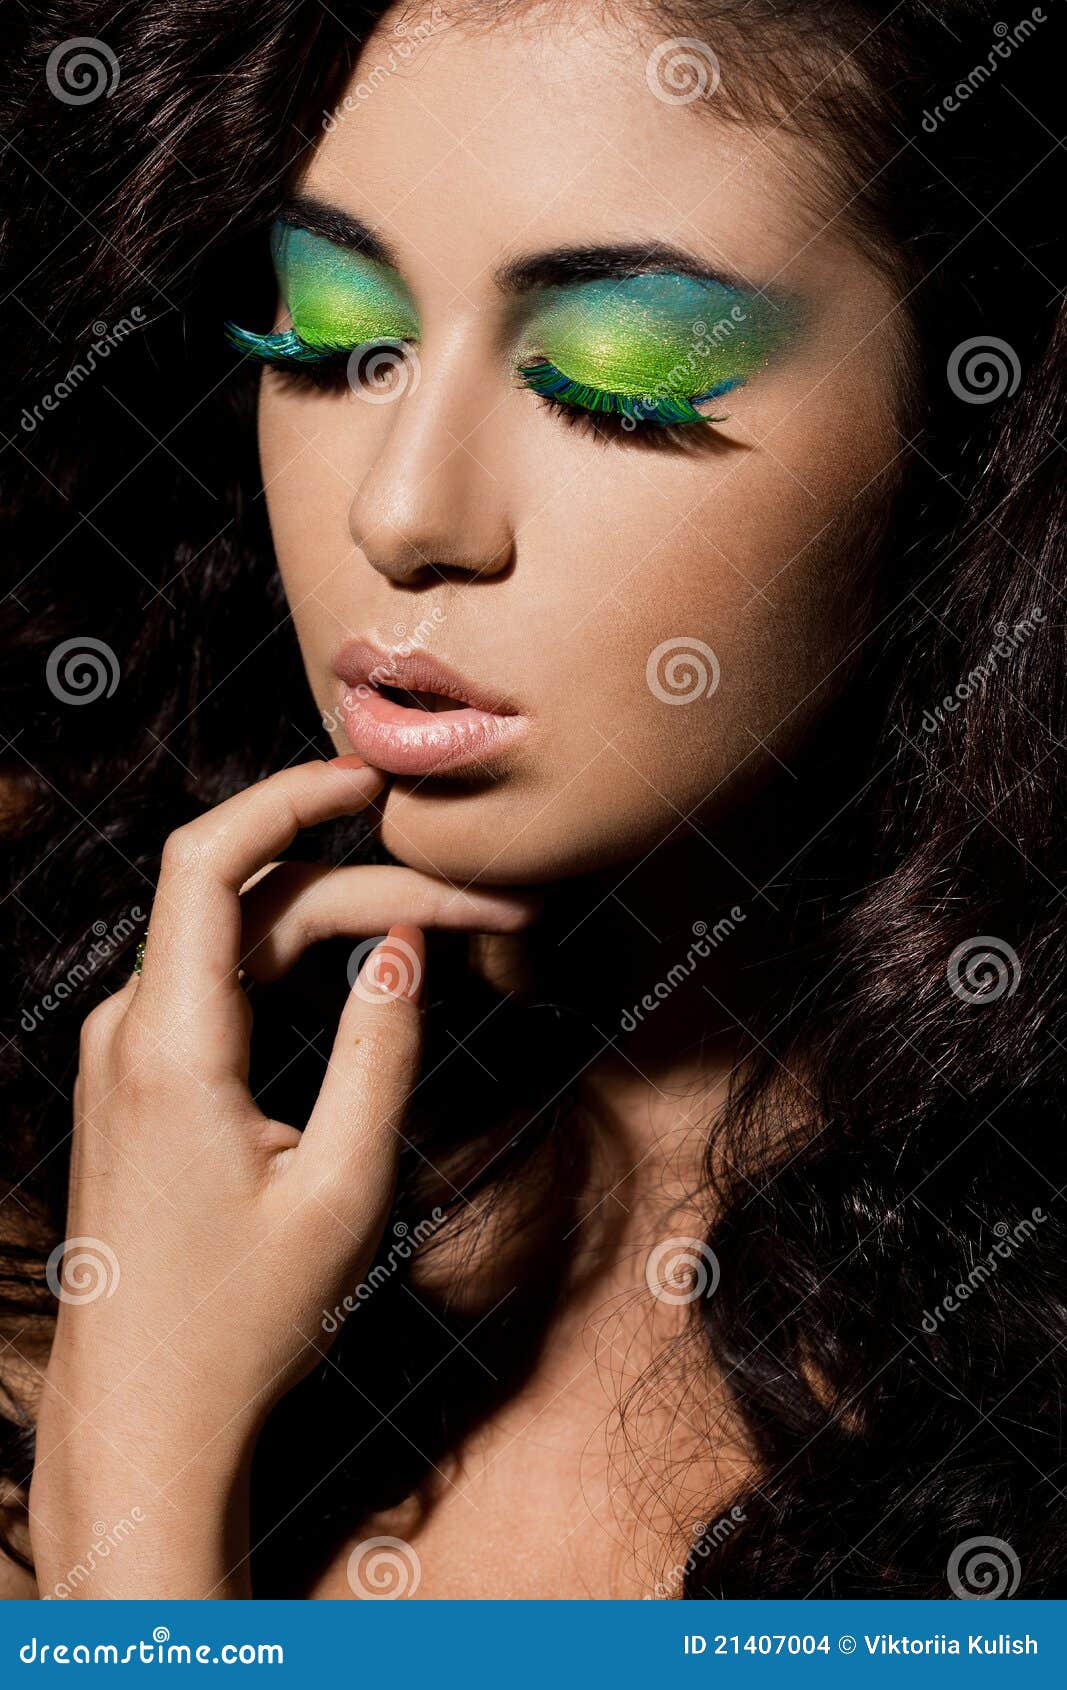 woman with green visage